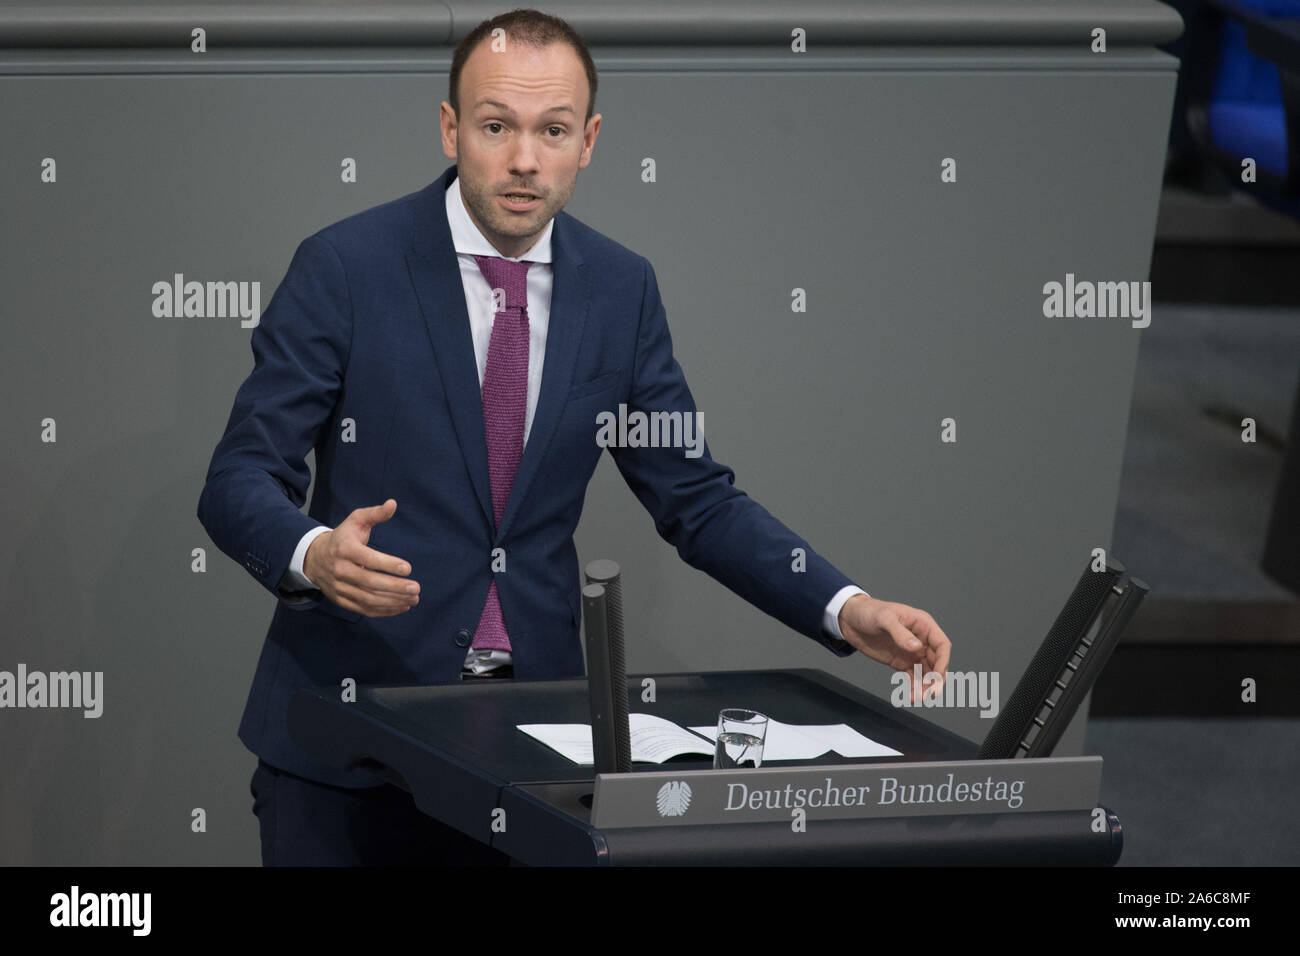 Berlin, Germany. 25th Oct, 2019. Nikolas Löbel (CDU/CSU) speaks at the plenary session of the German Bundestag. The topic is the 'Media and Communication Report 2018'. Credit: Jörg Carstensen/dpa/Alamy Live News Stock Photo